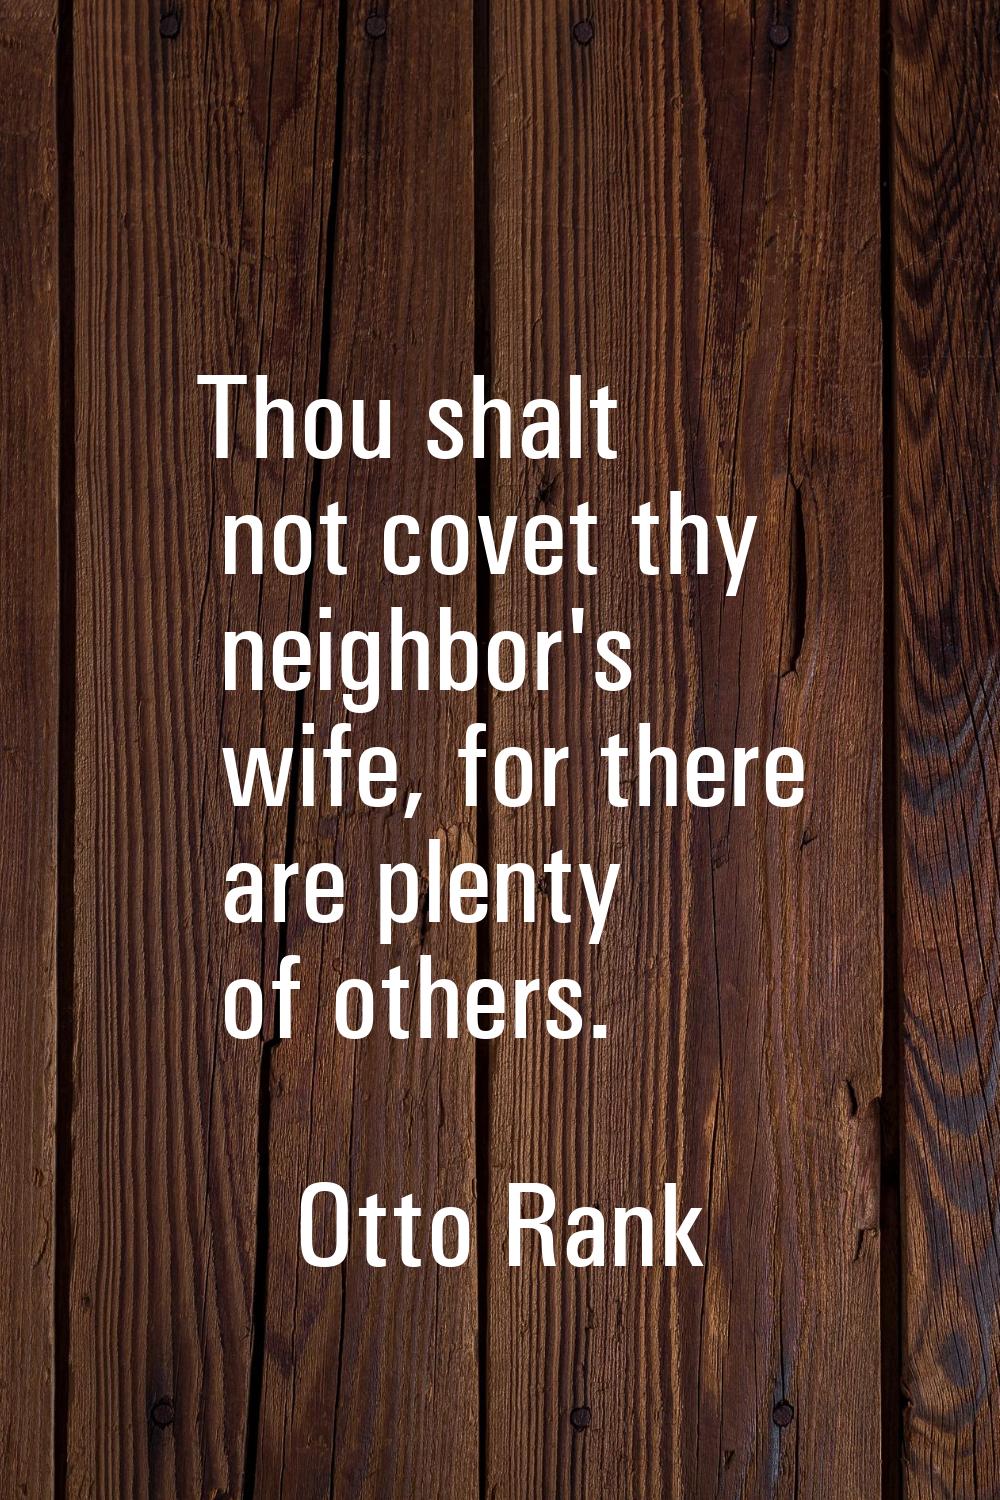 Thou shalt not covet thy neighbor's wife, for there are plenty of others.